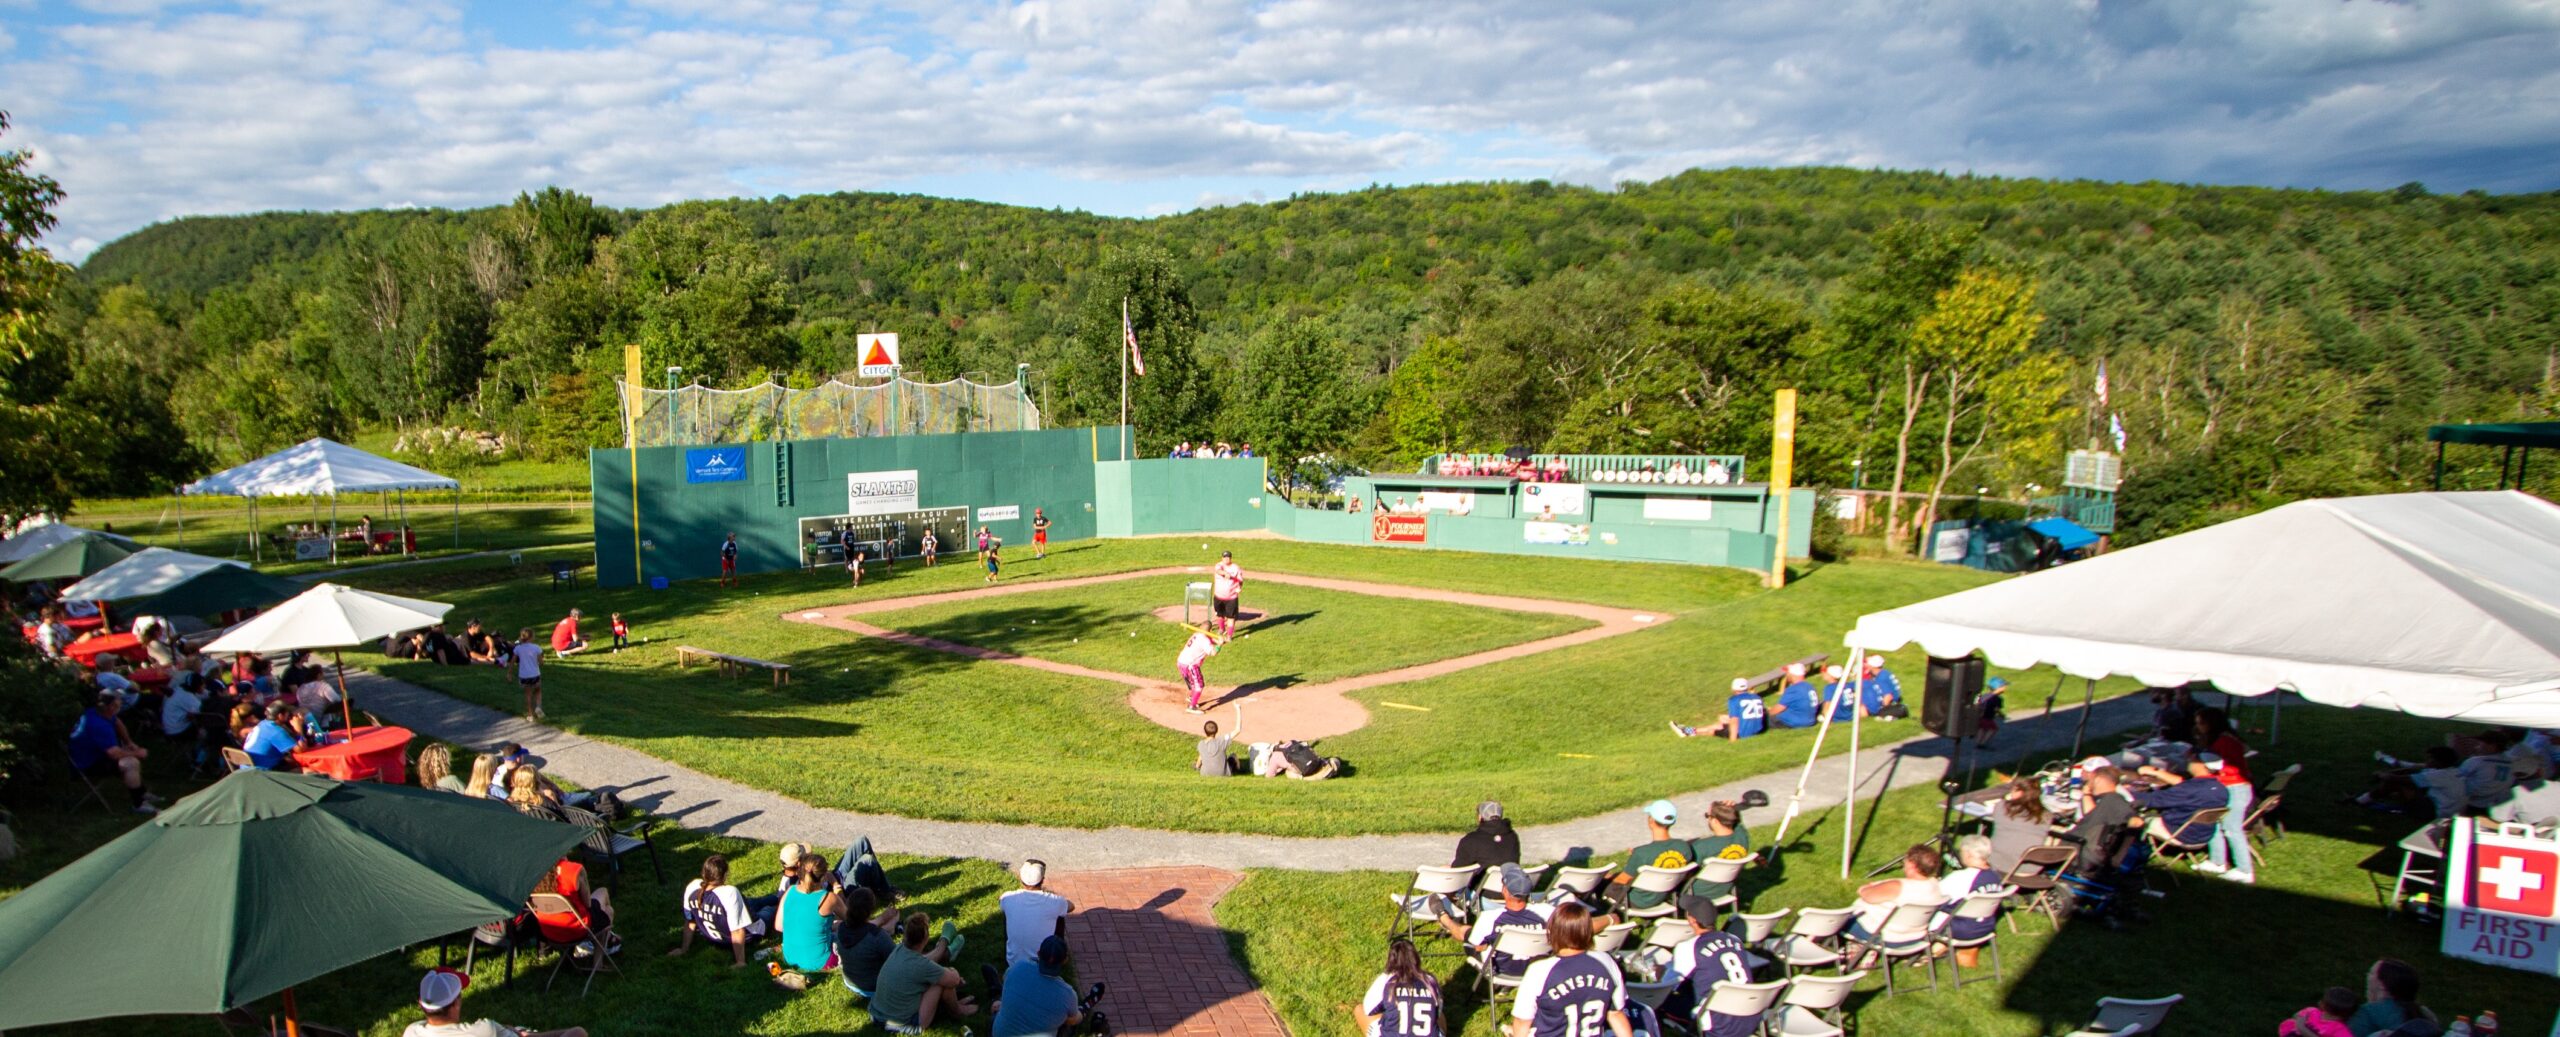 Home Slider 1 – 12th Annual Vermont Summer Classic Update